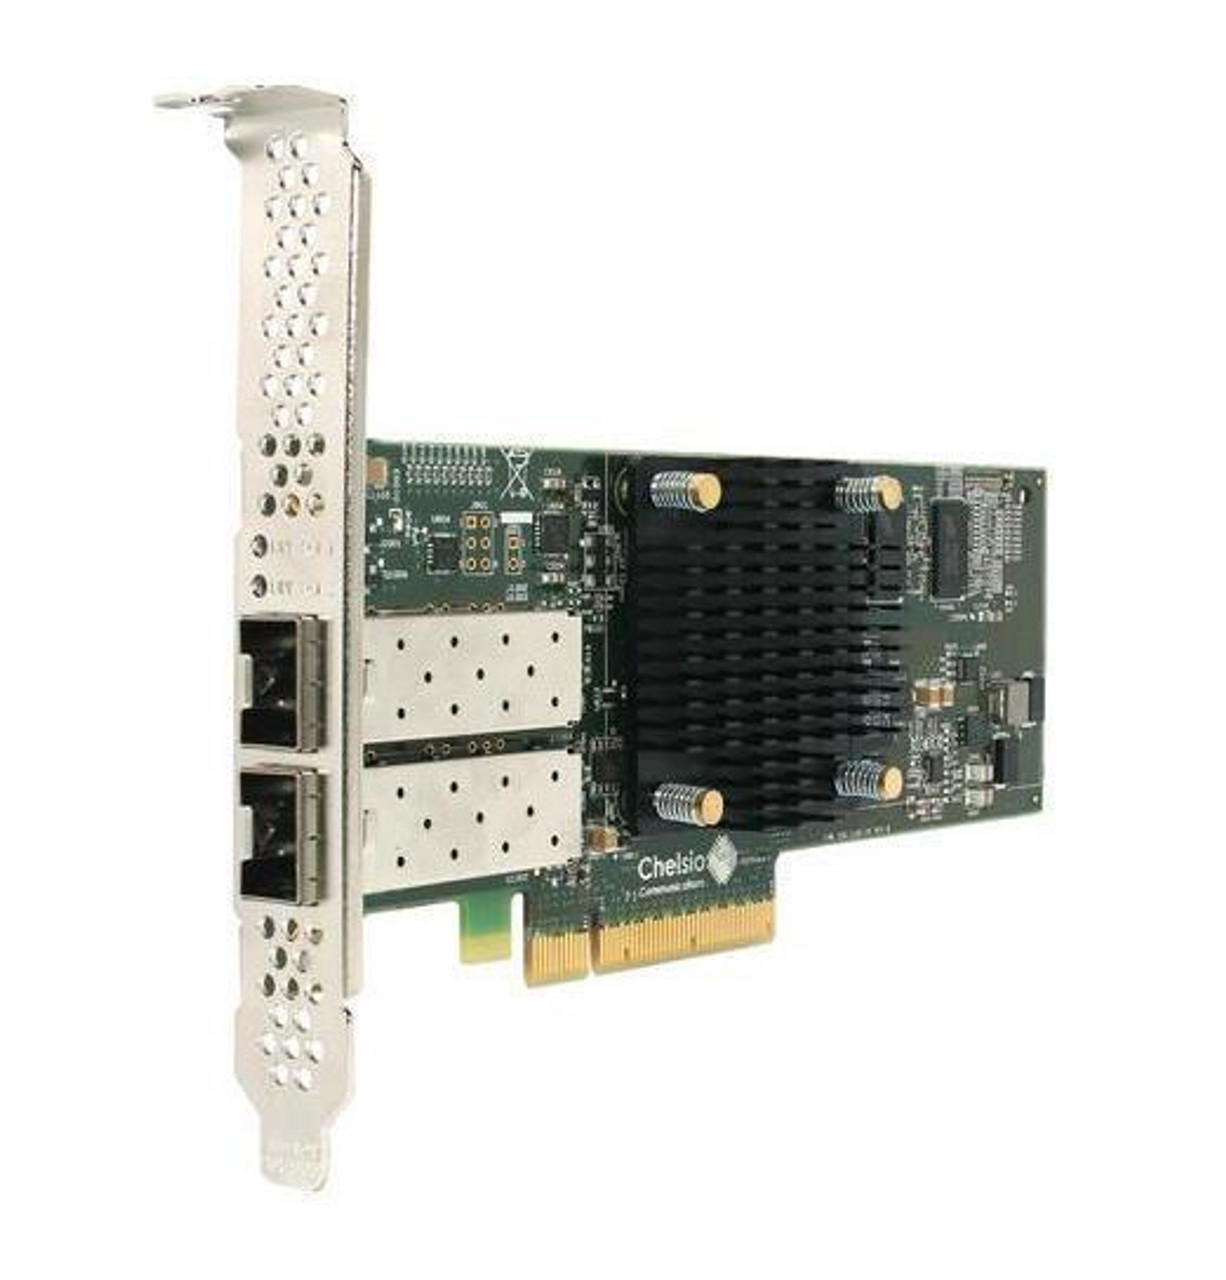 406-10278 Dell Emulex OCe10102-IX-D Dual-Ports 10Gbps iSCSI PCI Express Converged Network Adapter